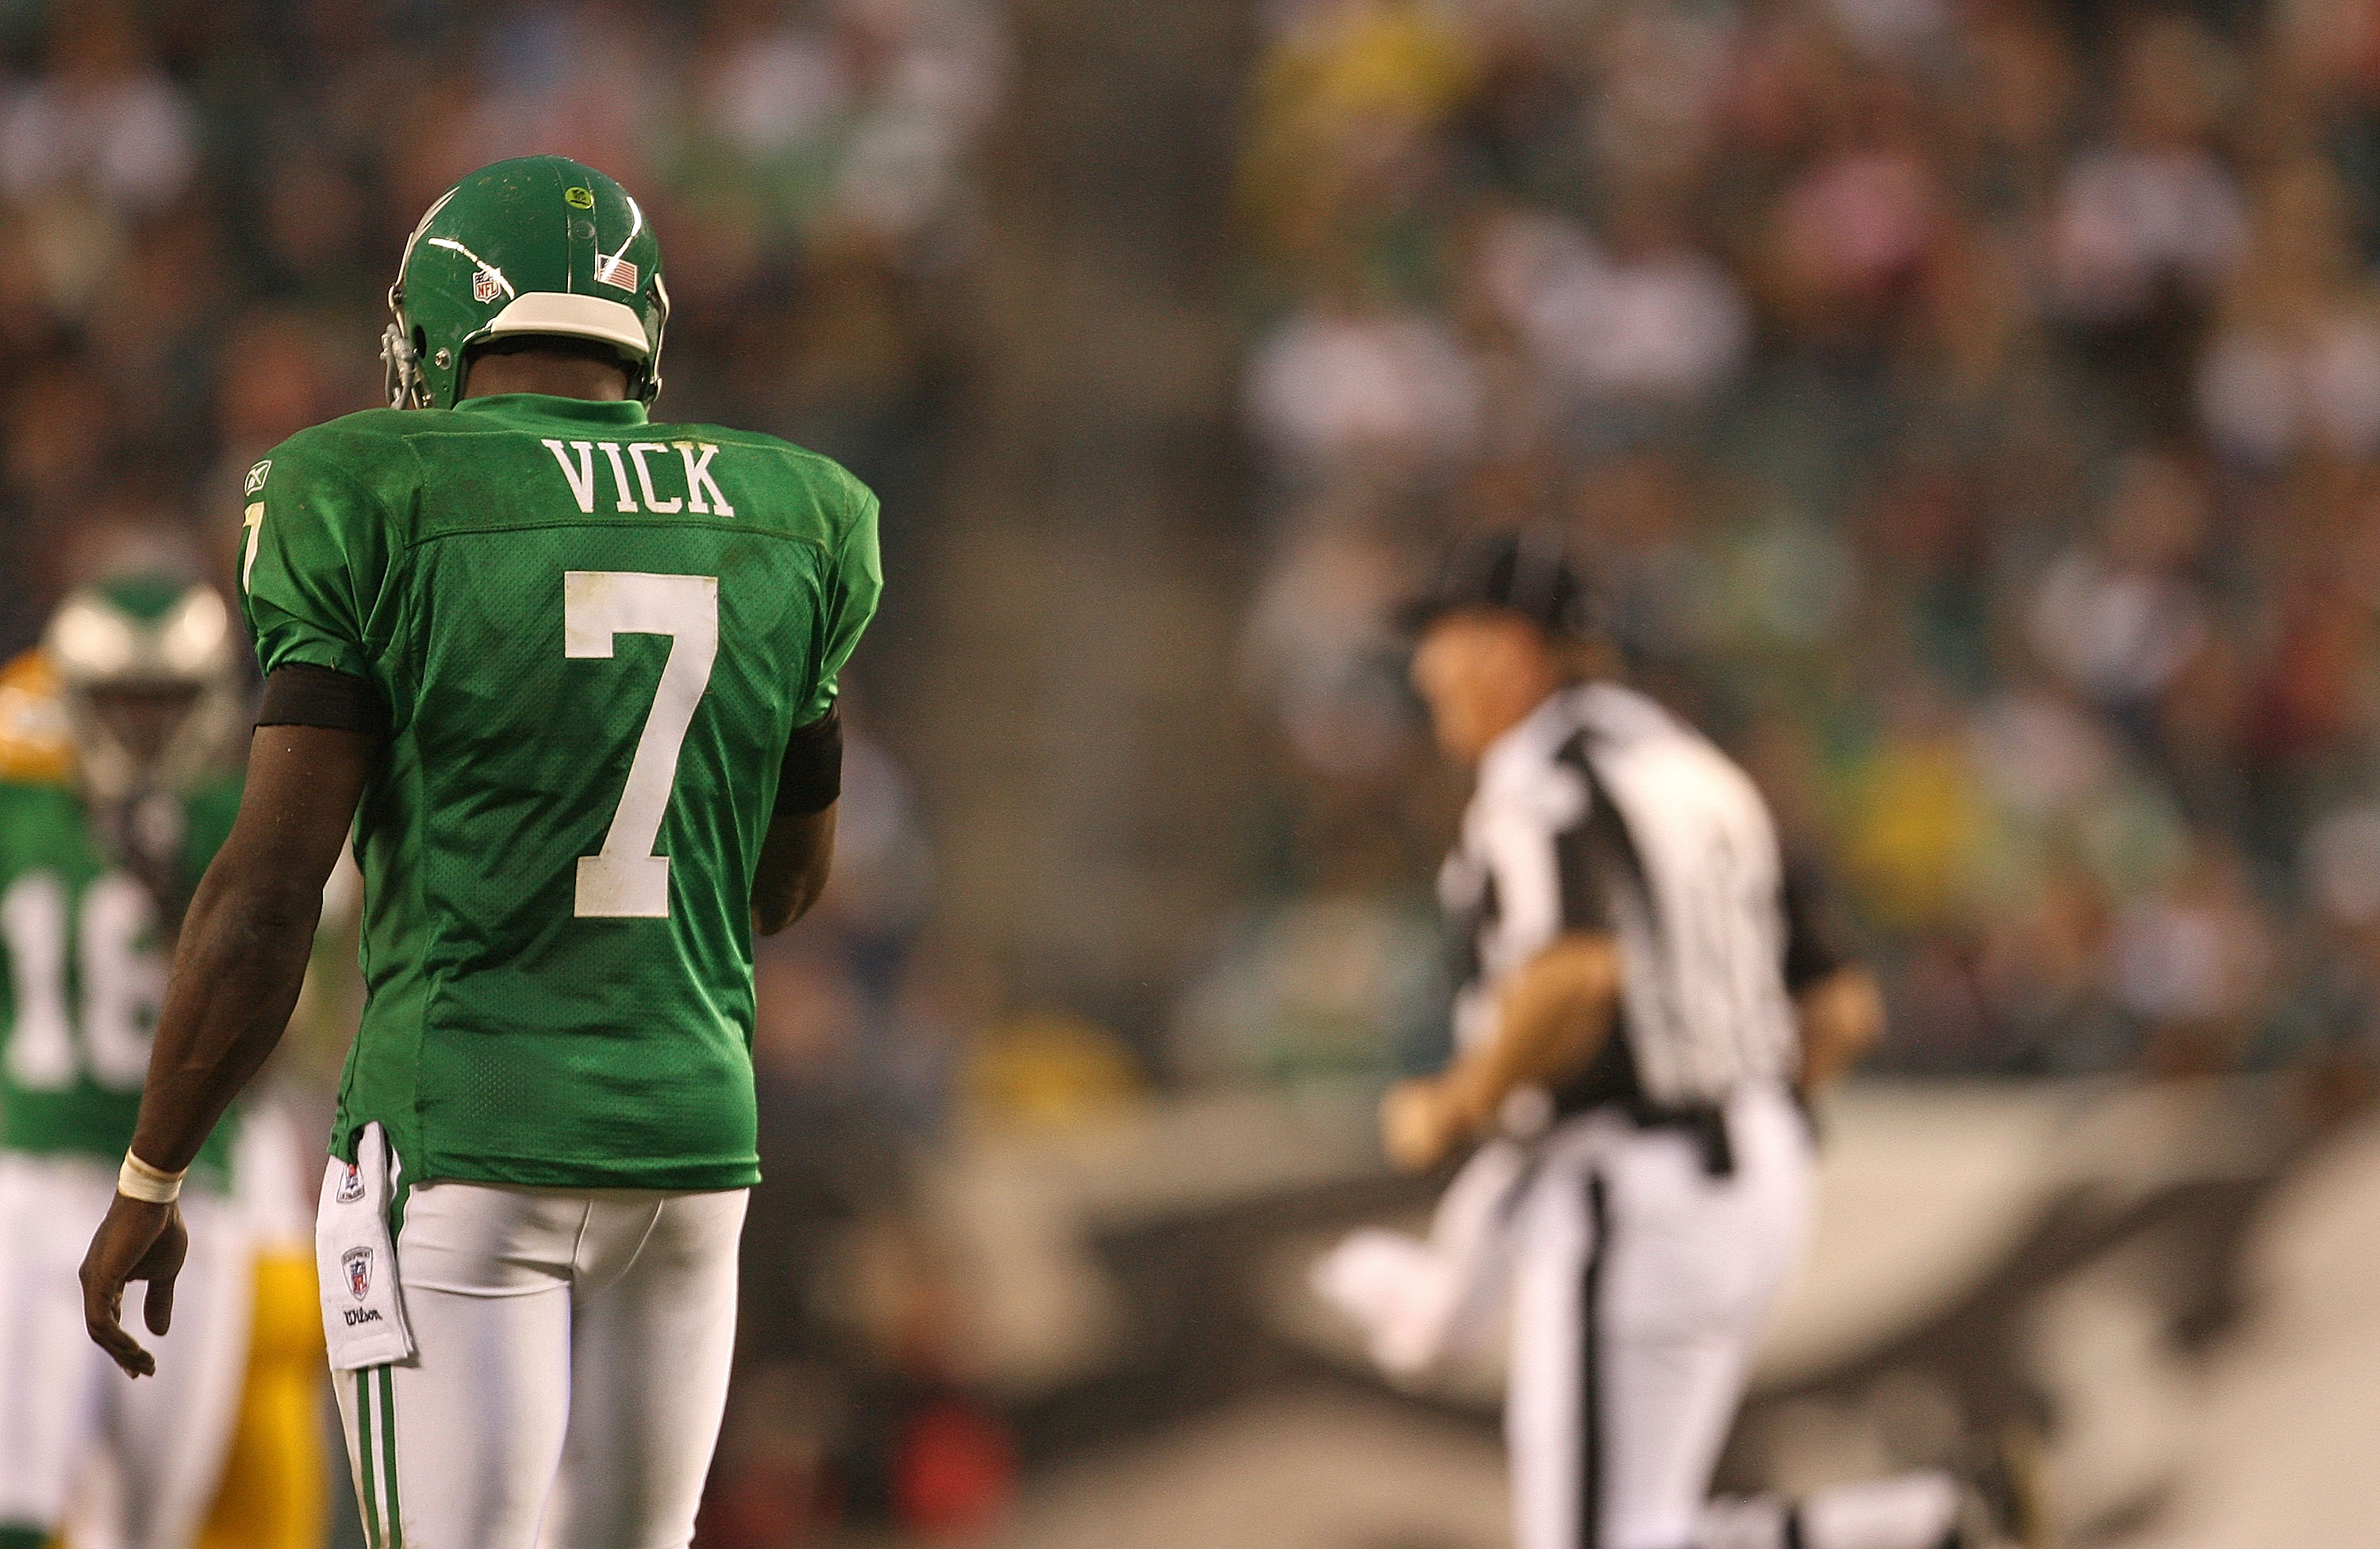 michael vick throwback eagles jersey